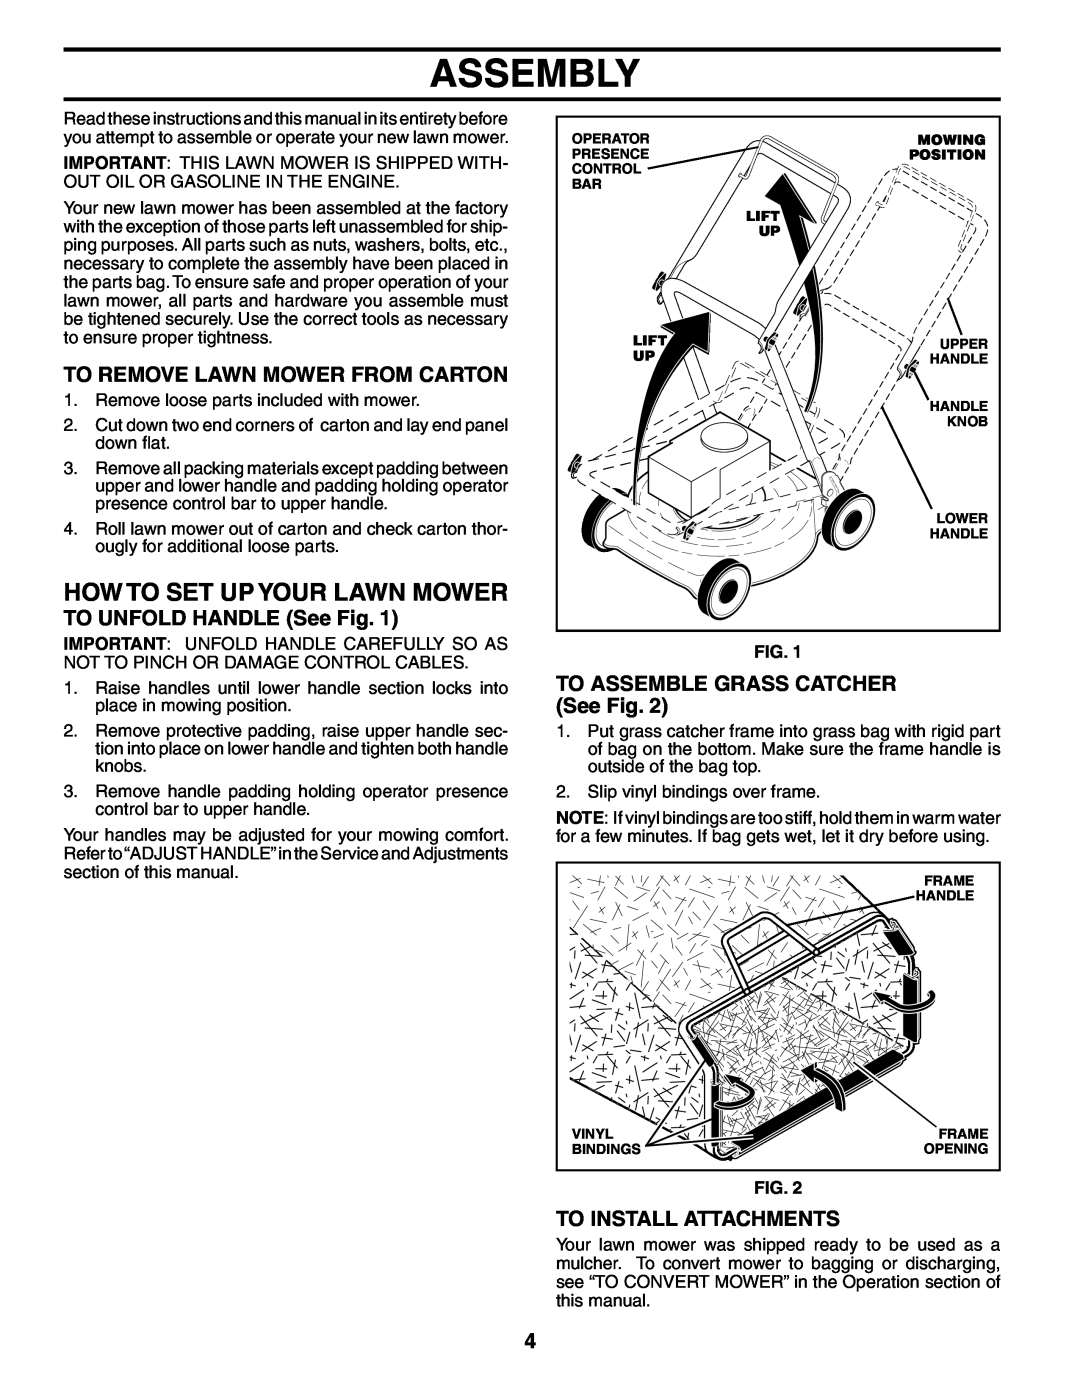 Husqvarna 917.37535 Assembly, How To Set Up Your Lawn Mower, To Remove Lawn Mower From Carton, TO UNFOLD HANDLE See Fig 